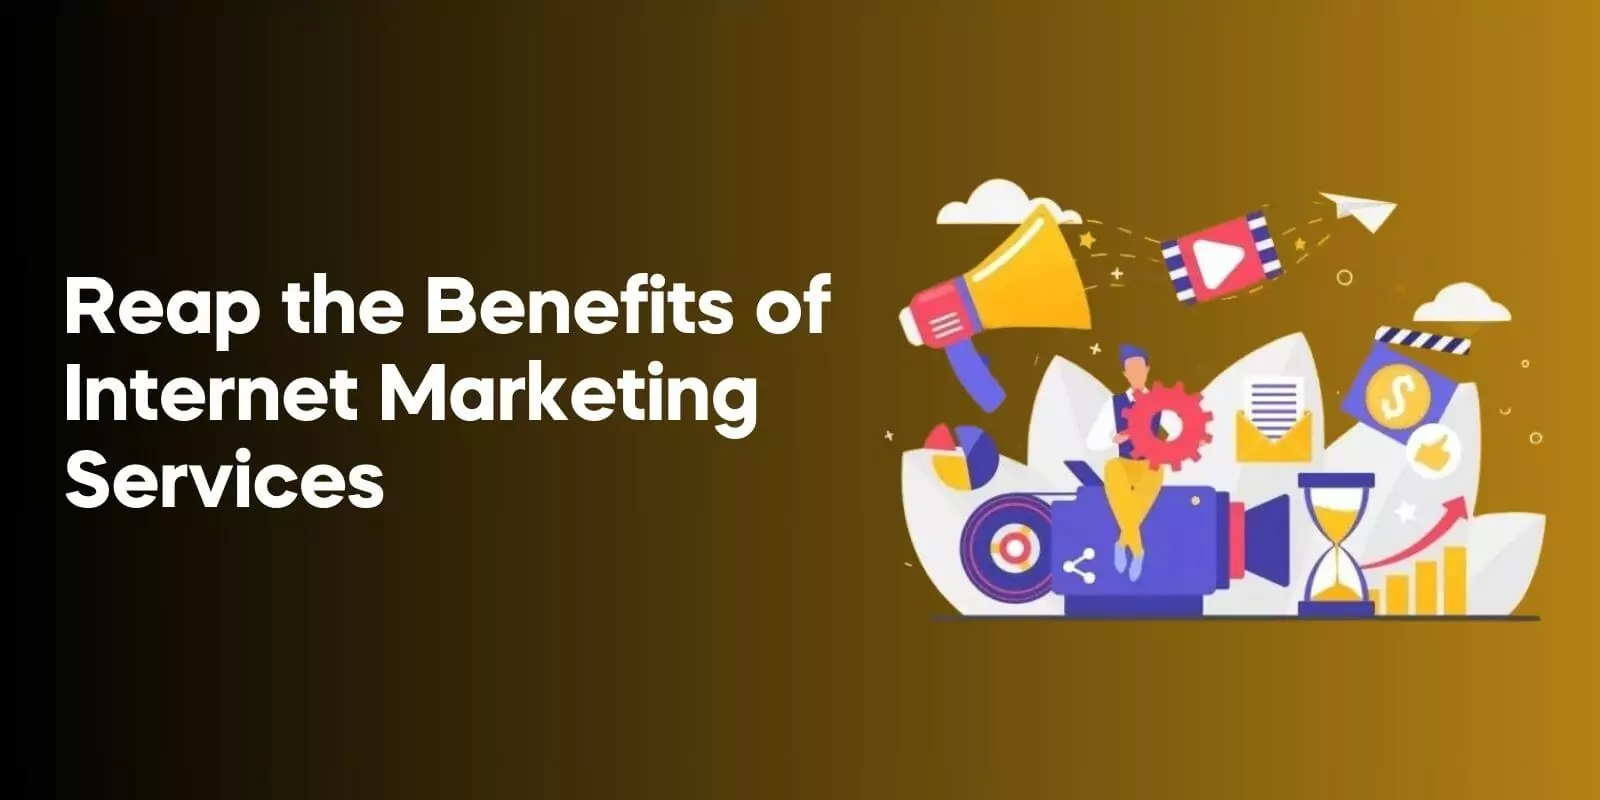 Reap the Benefits of Internet Marketing Services